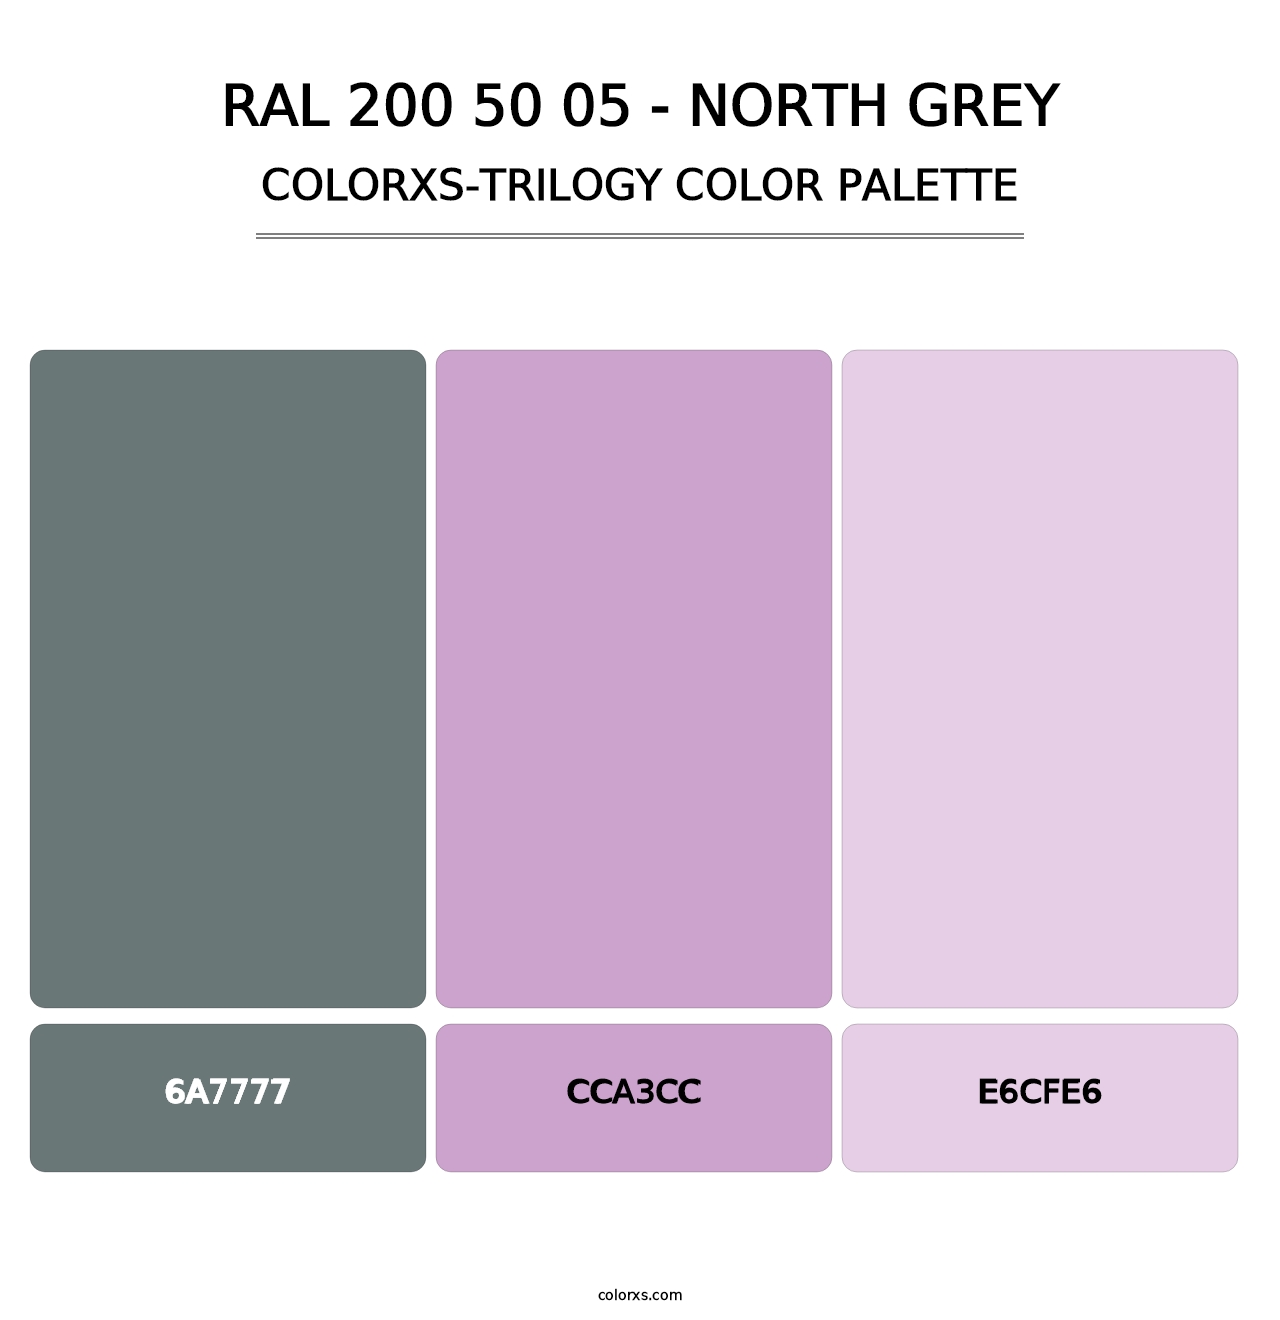 RAL 200 50 05 - North Grey - Colorxs Trilogy Palette